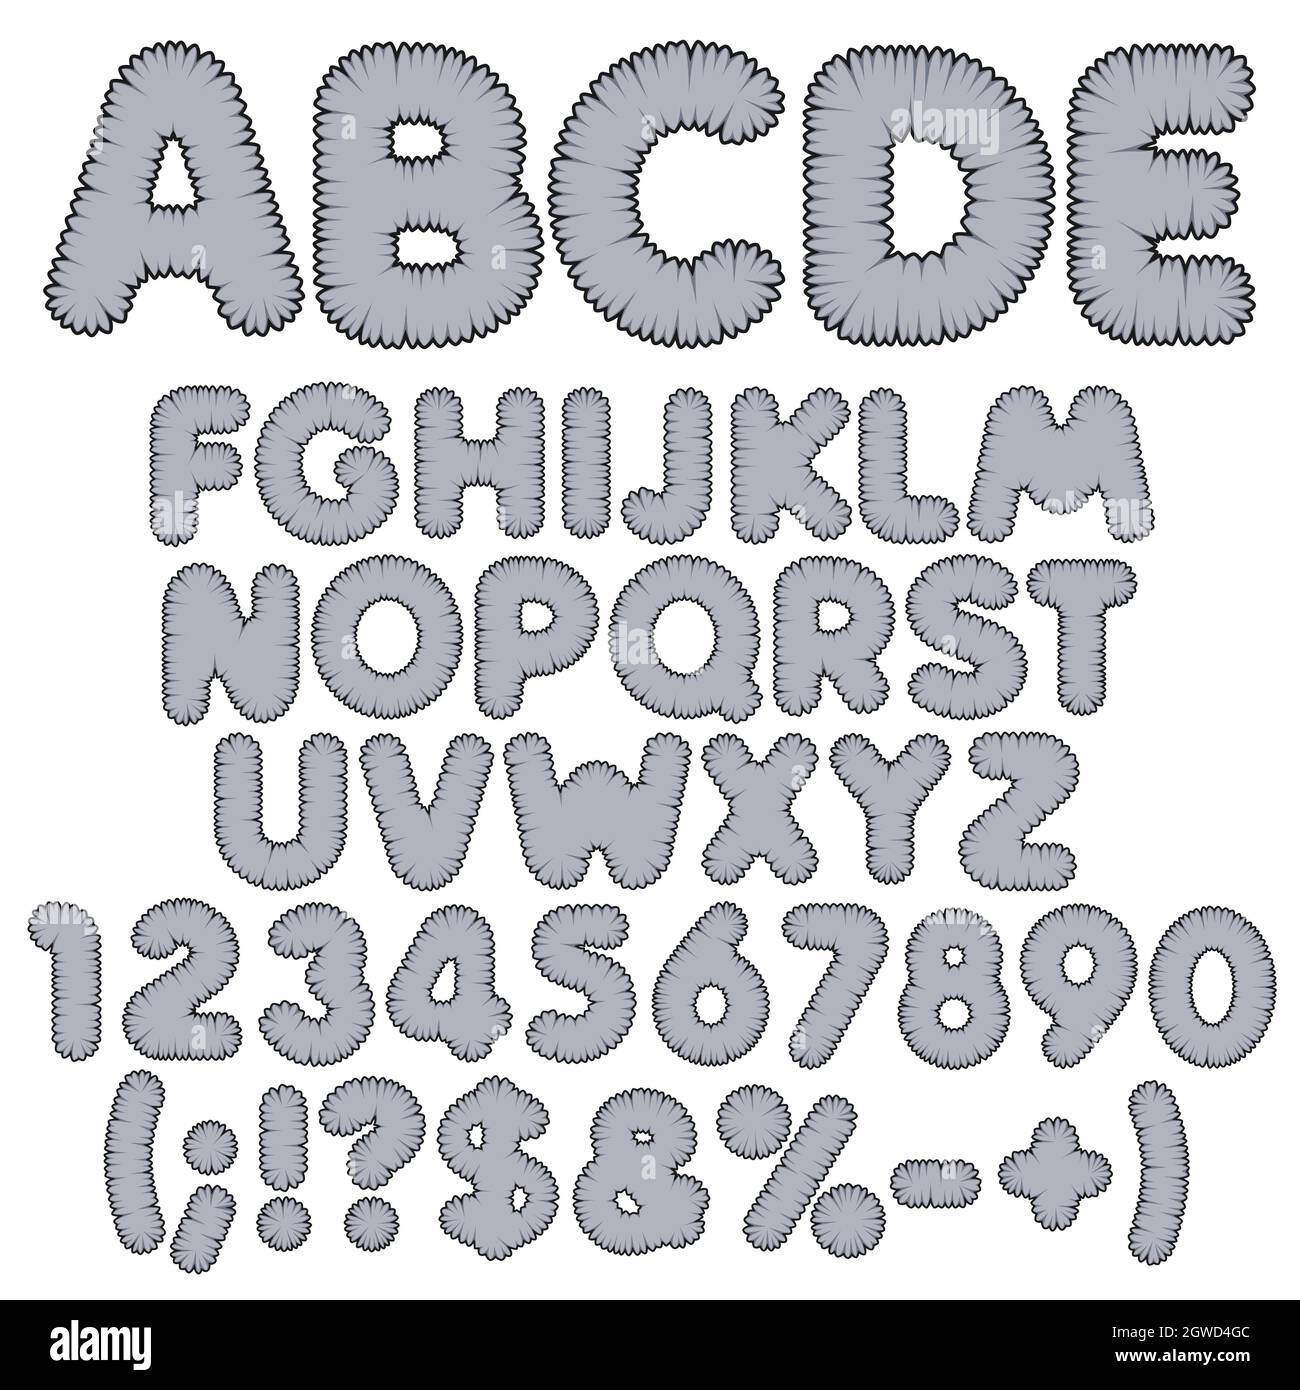 Shaggy color alphabet, letters, numbers and signs. Isolated vector objects on white background. Stock Vector